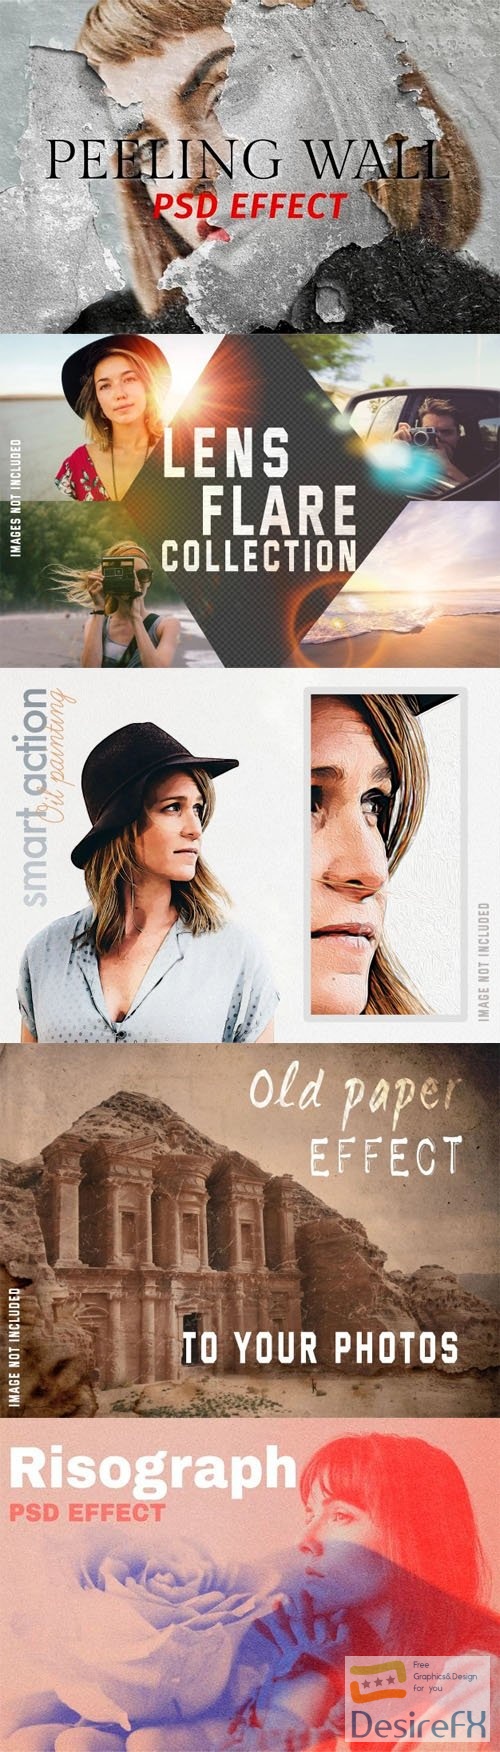 10+ Awesome Photoshop Effects &amp; Overlays Collection